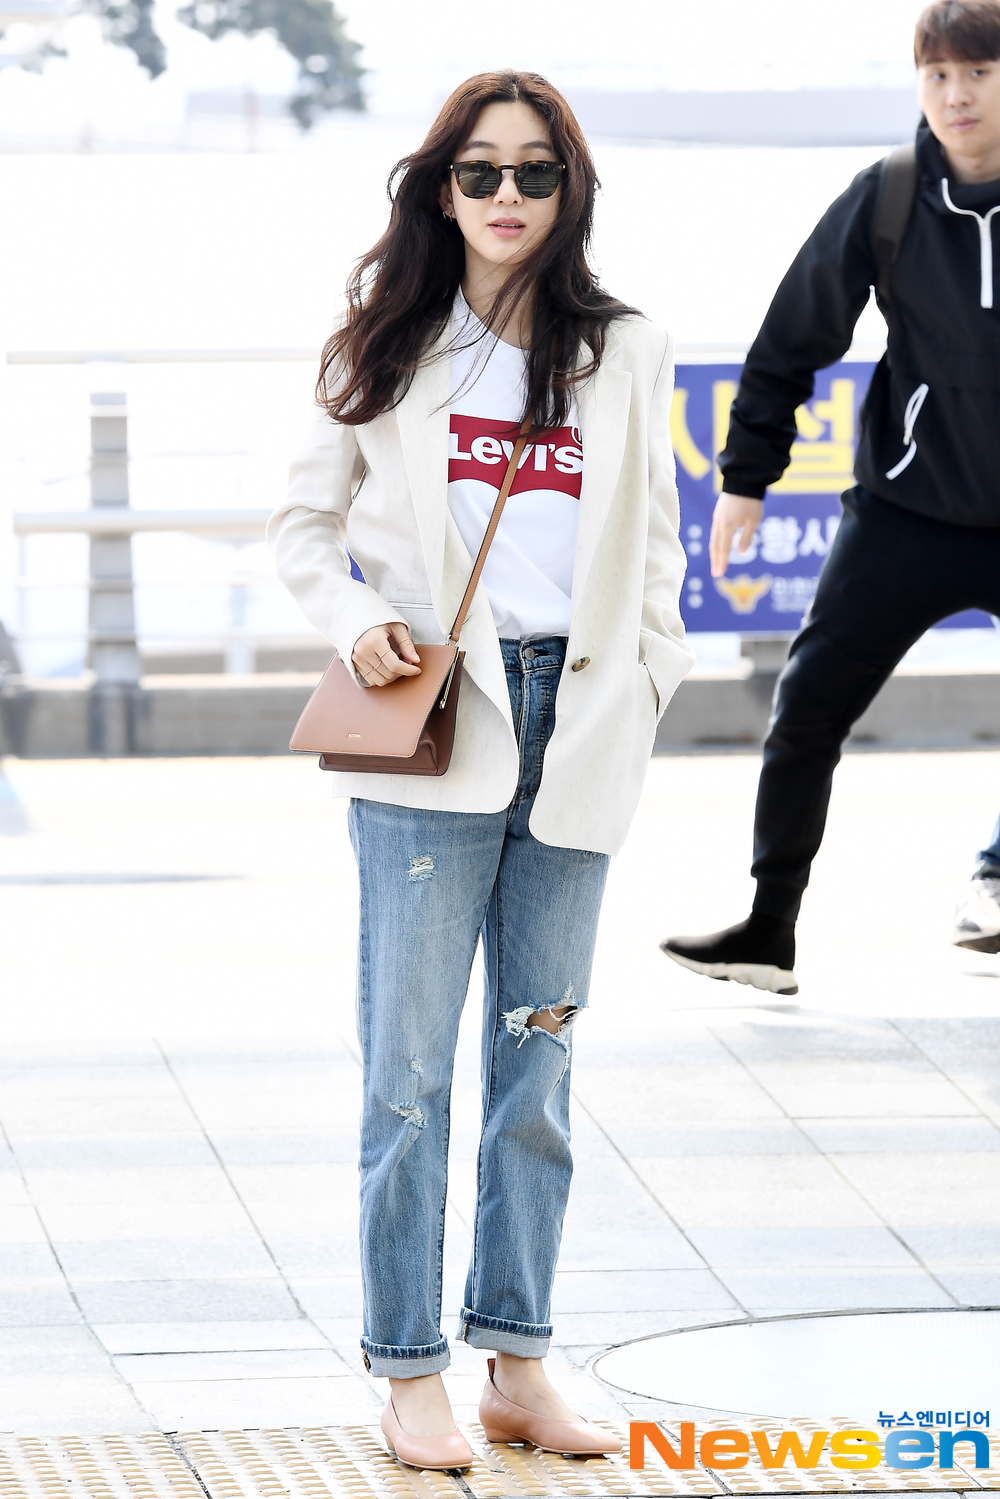 Actor Jung Ryeo-won left for Los Angeles on April 11th at Incheon International Airport in Unseo-dong, Jung-gu, Incheon.Actor Jung Ryeo-won is leaving for Los Angeles in United States of America with an airport fashion.exponential earthquake